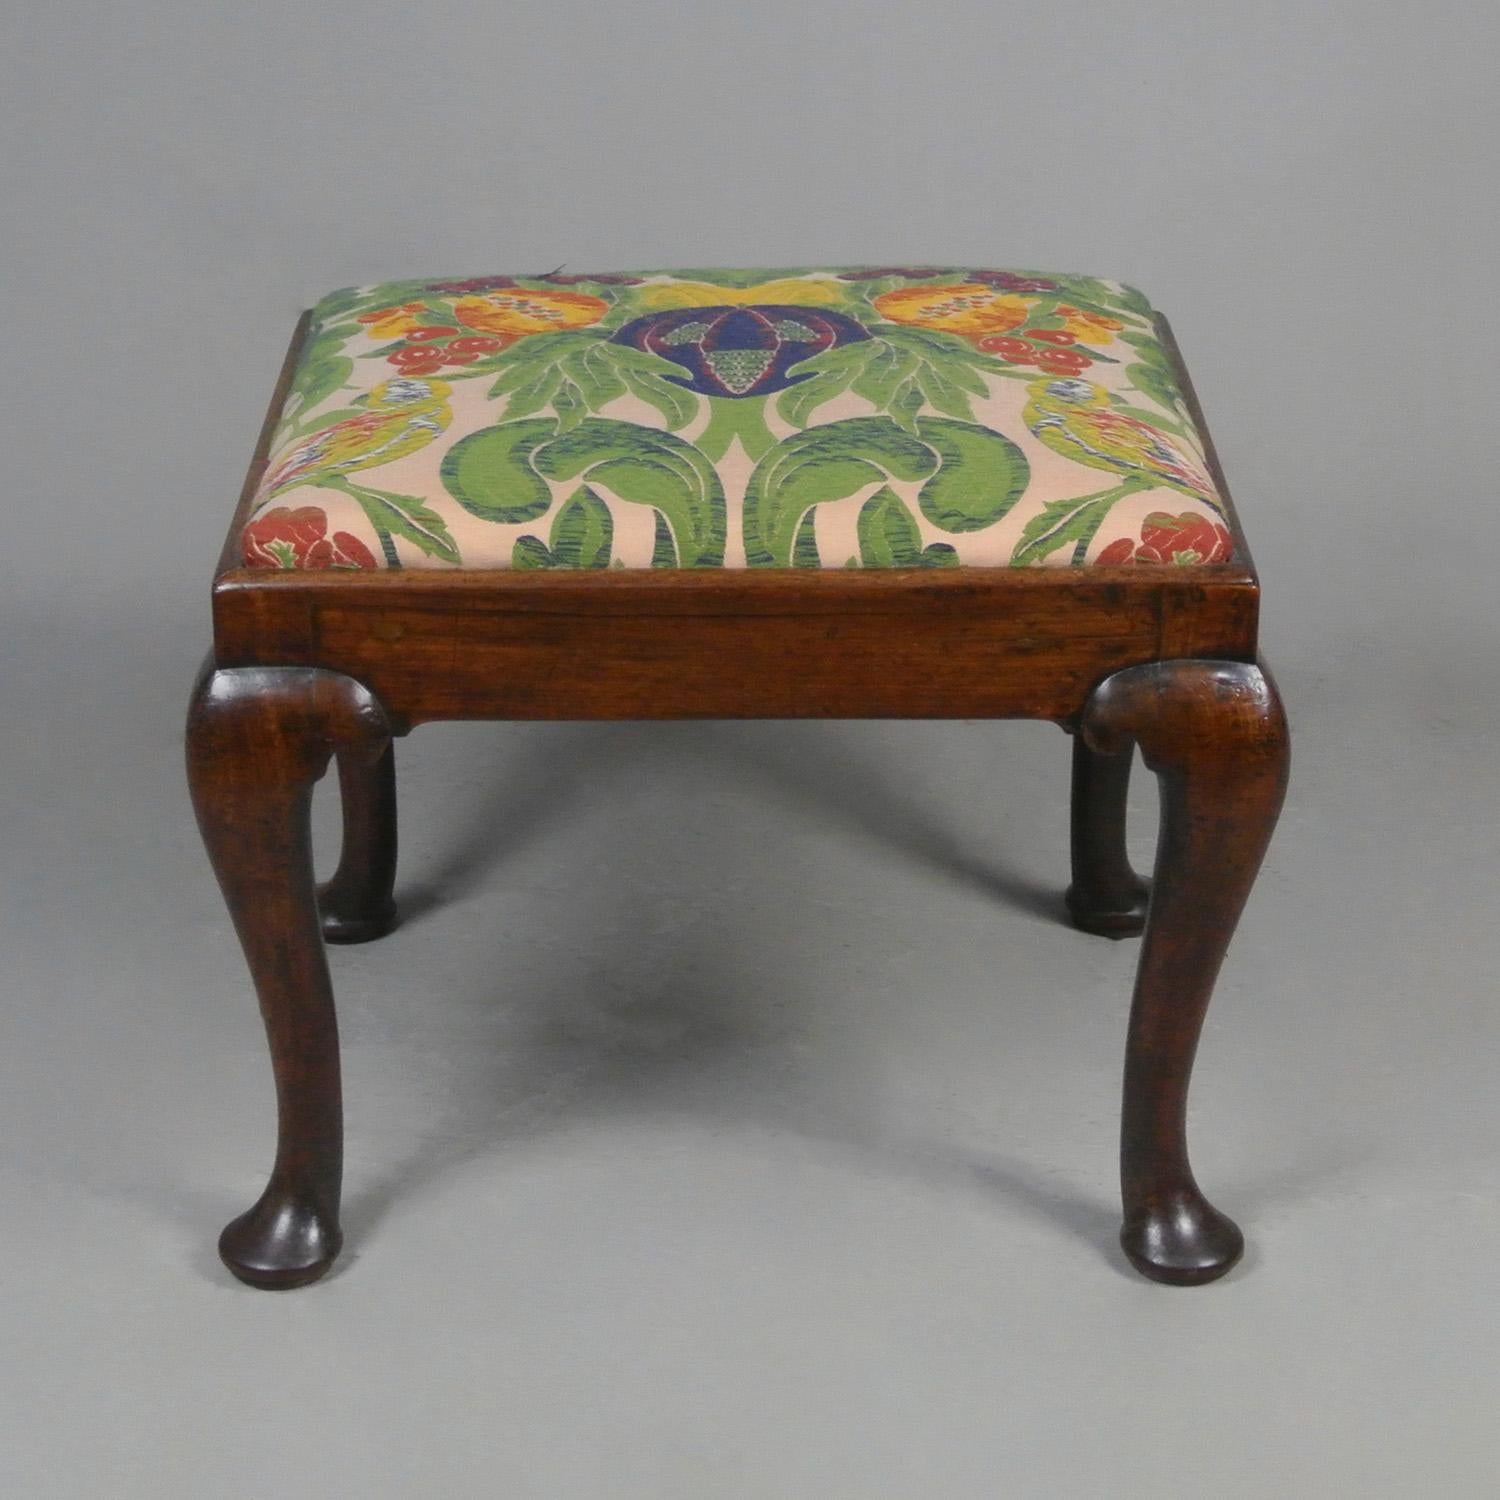 A lovely English stool made by hand in solid walnut and dating from c. 1740 and set on cabriole legs with button pad feet and well shaped hips.

Newly upholstered in a superb quality Gainsborough Silk Weaving Company tapestry fabric – a pattern and